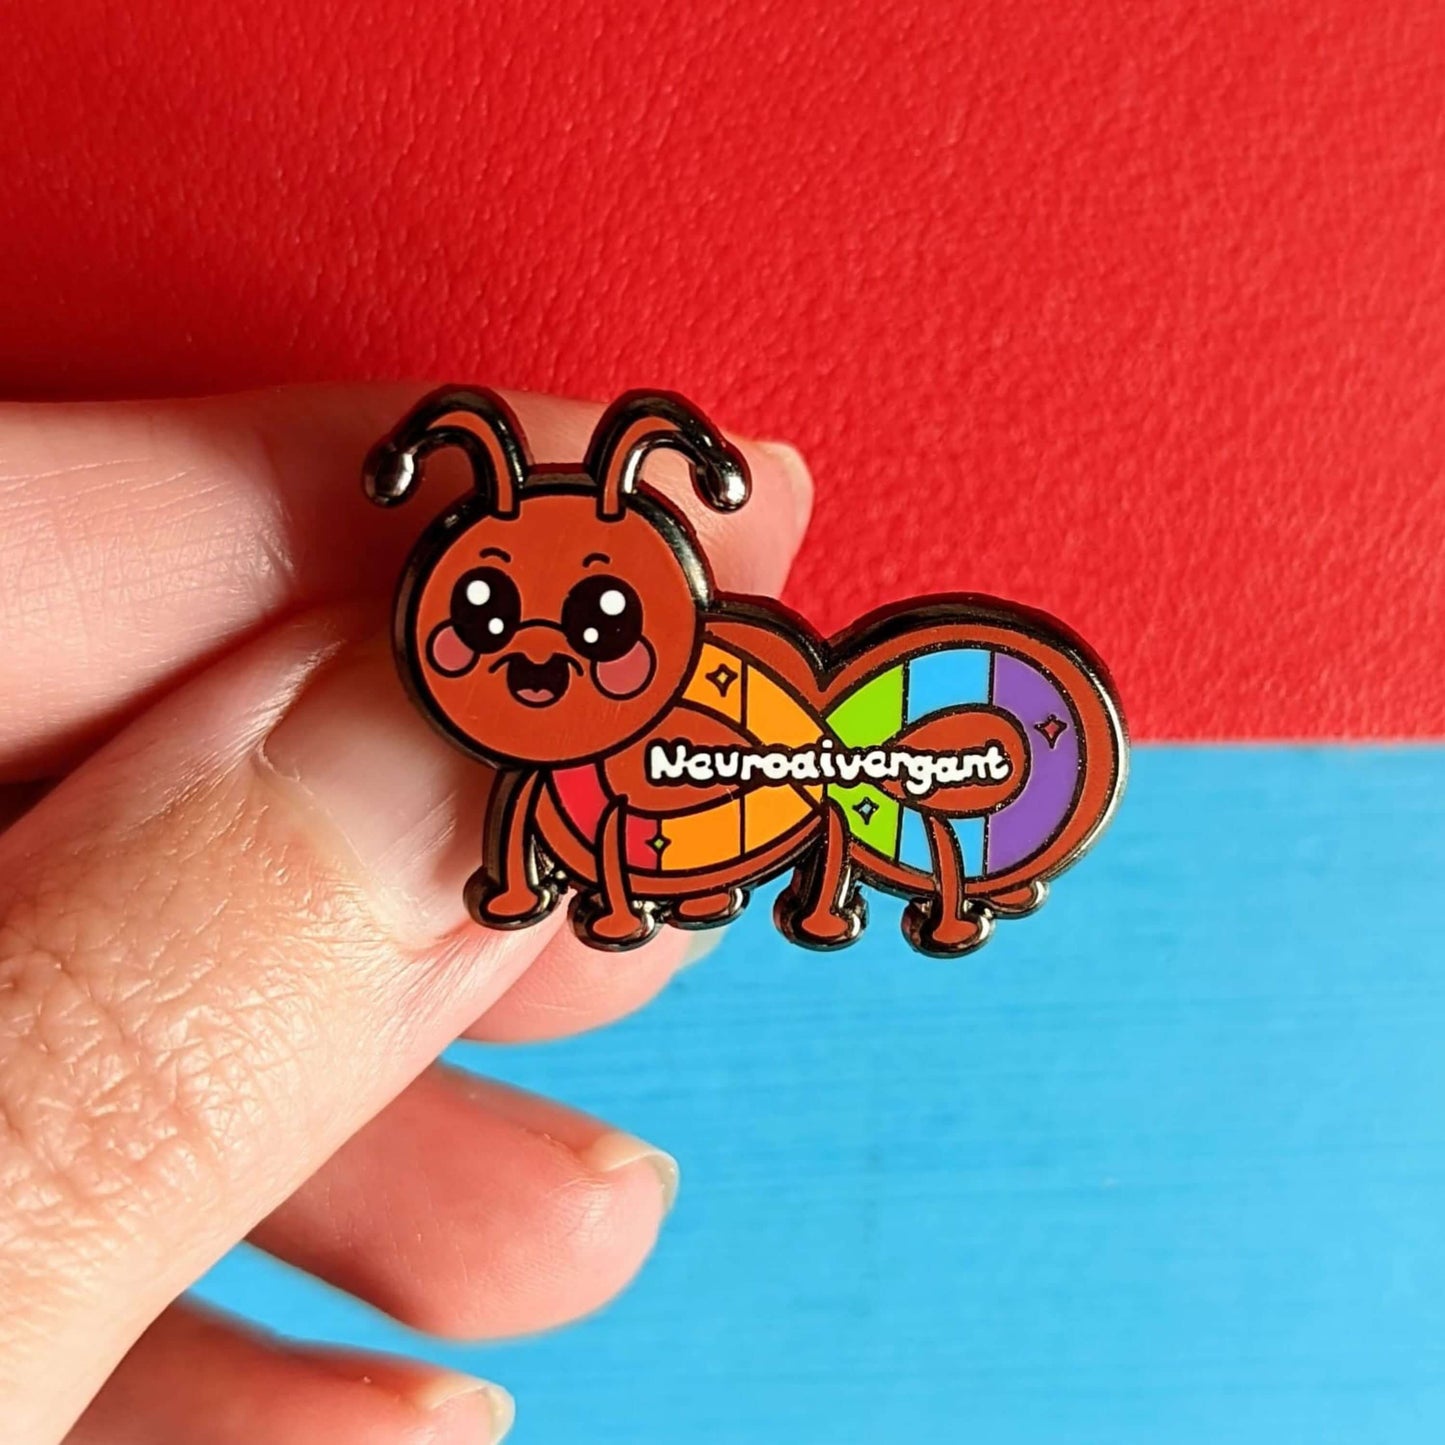 The Neurodivergant Ant Enamel Pin - Neurodivergent on a red and blue background. The brown ant shape enamel pin is smiling with a rainbow infinity symbol and white text reading 'neurodivergant' with sparkles across its body. The hand drawn design is raising awareness for neurodiversity.